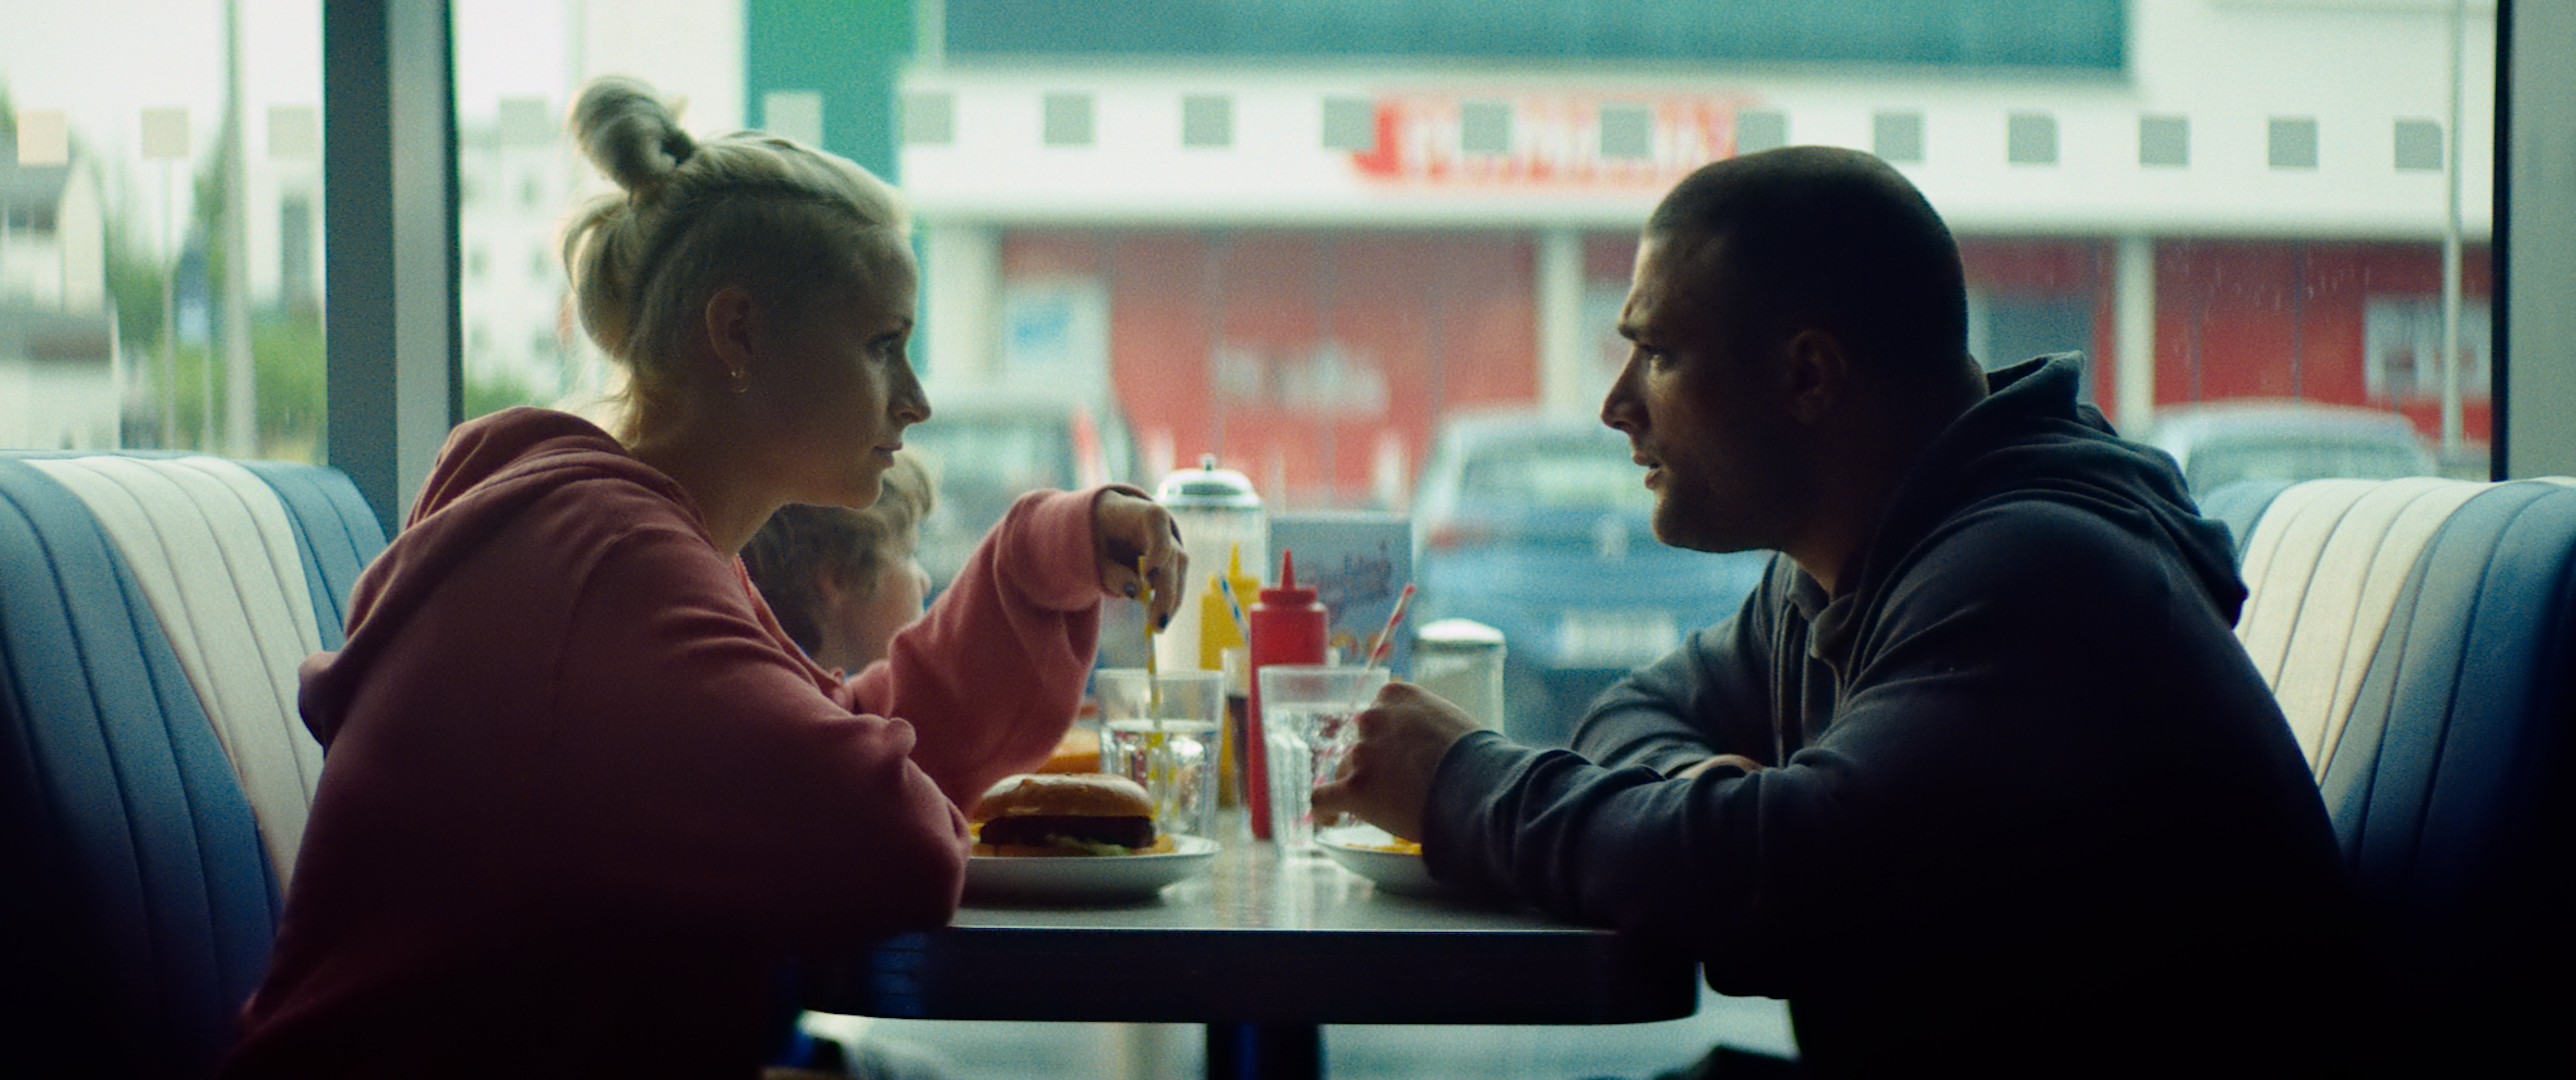 Cosmo Jarvis and Niamh Algar in Calm with Horses (2019)